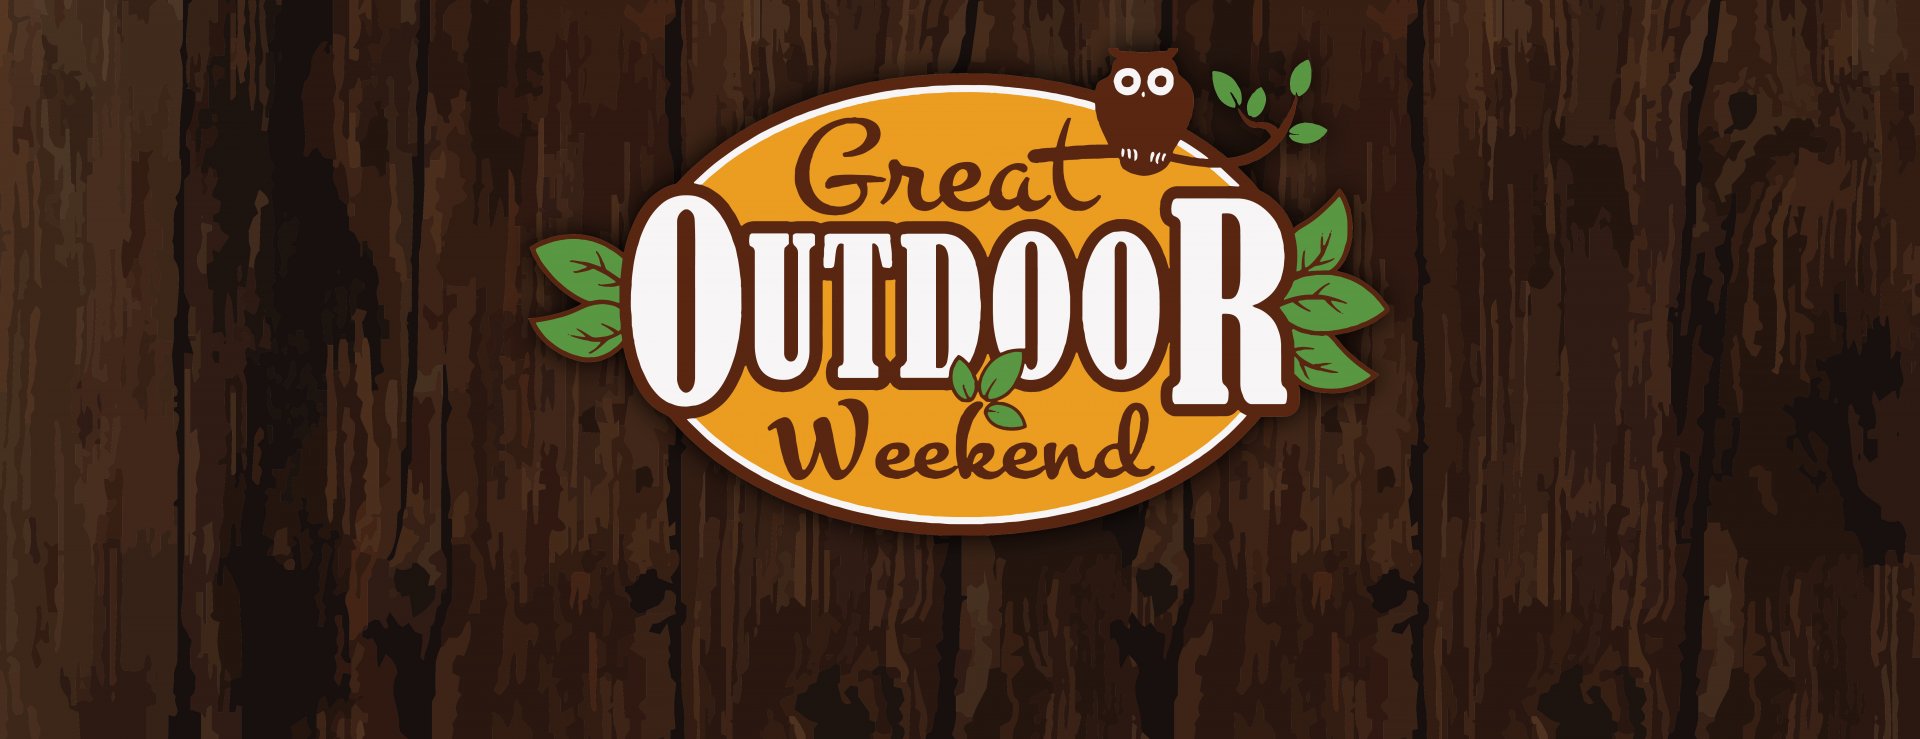 https://www.cincynature.org/things-to-do/great-outdoor-weekend/